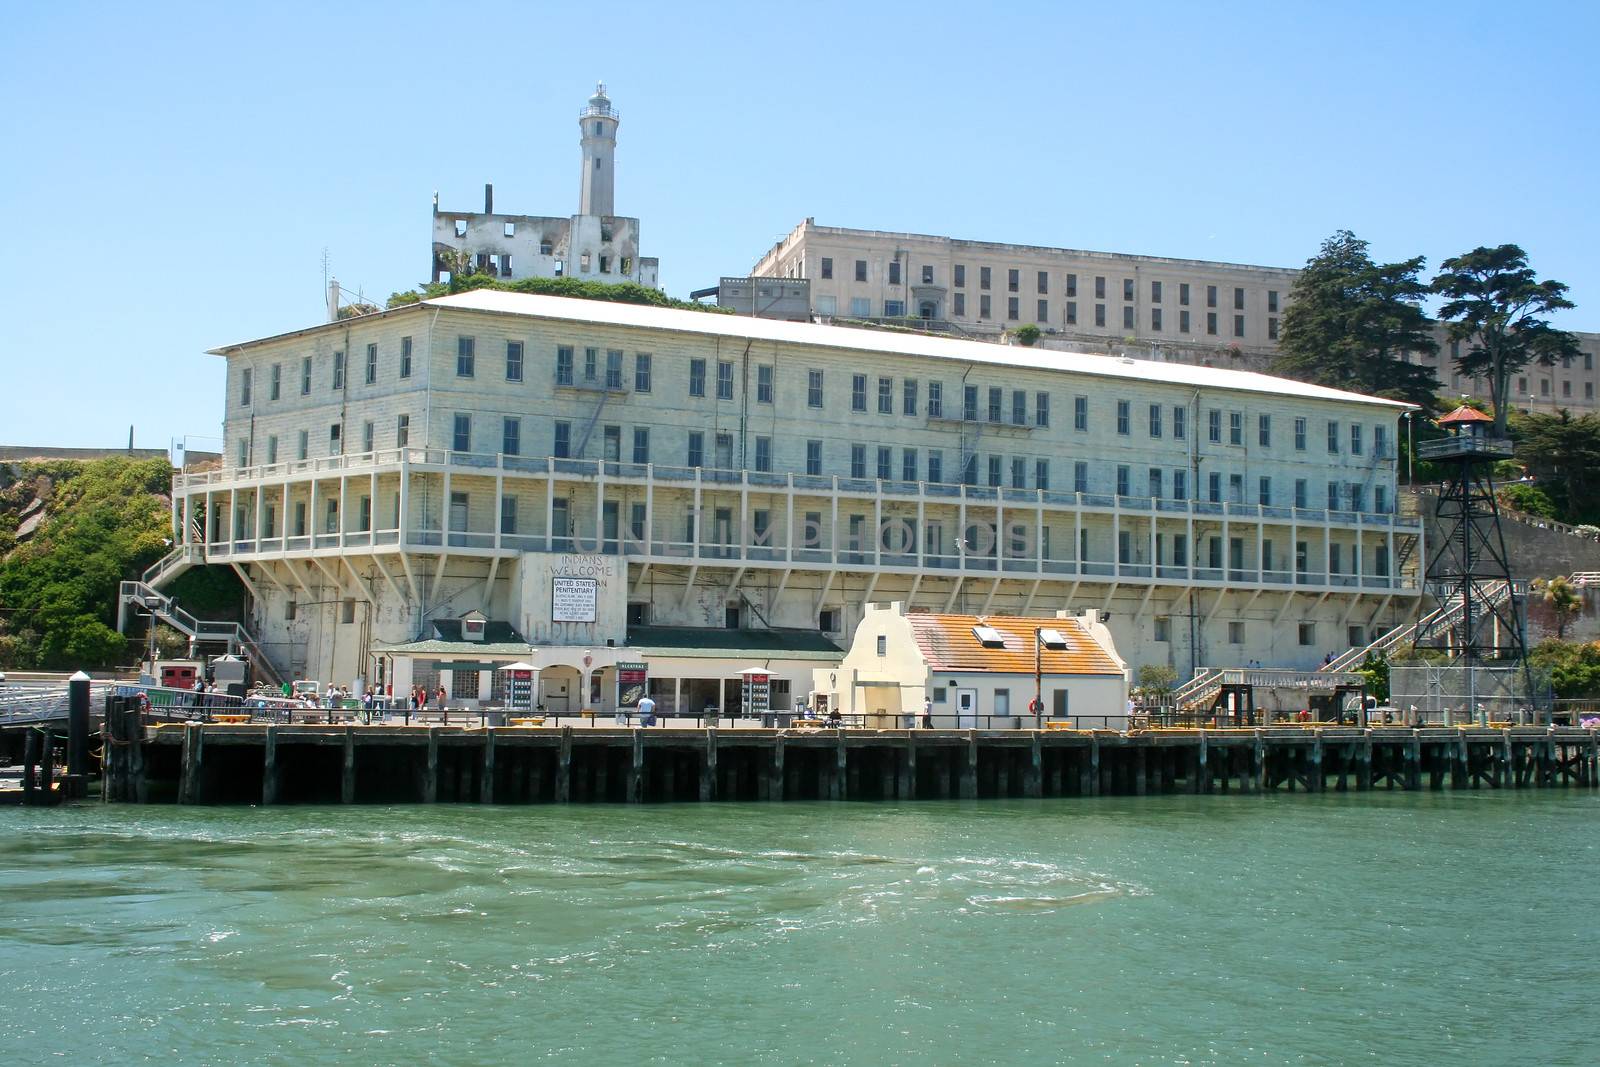 Building 64 residential apartments with the main cell block in the background on Alcatraz Island San Francisco.